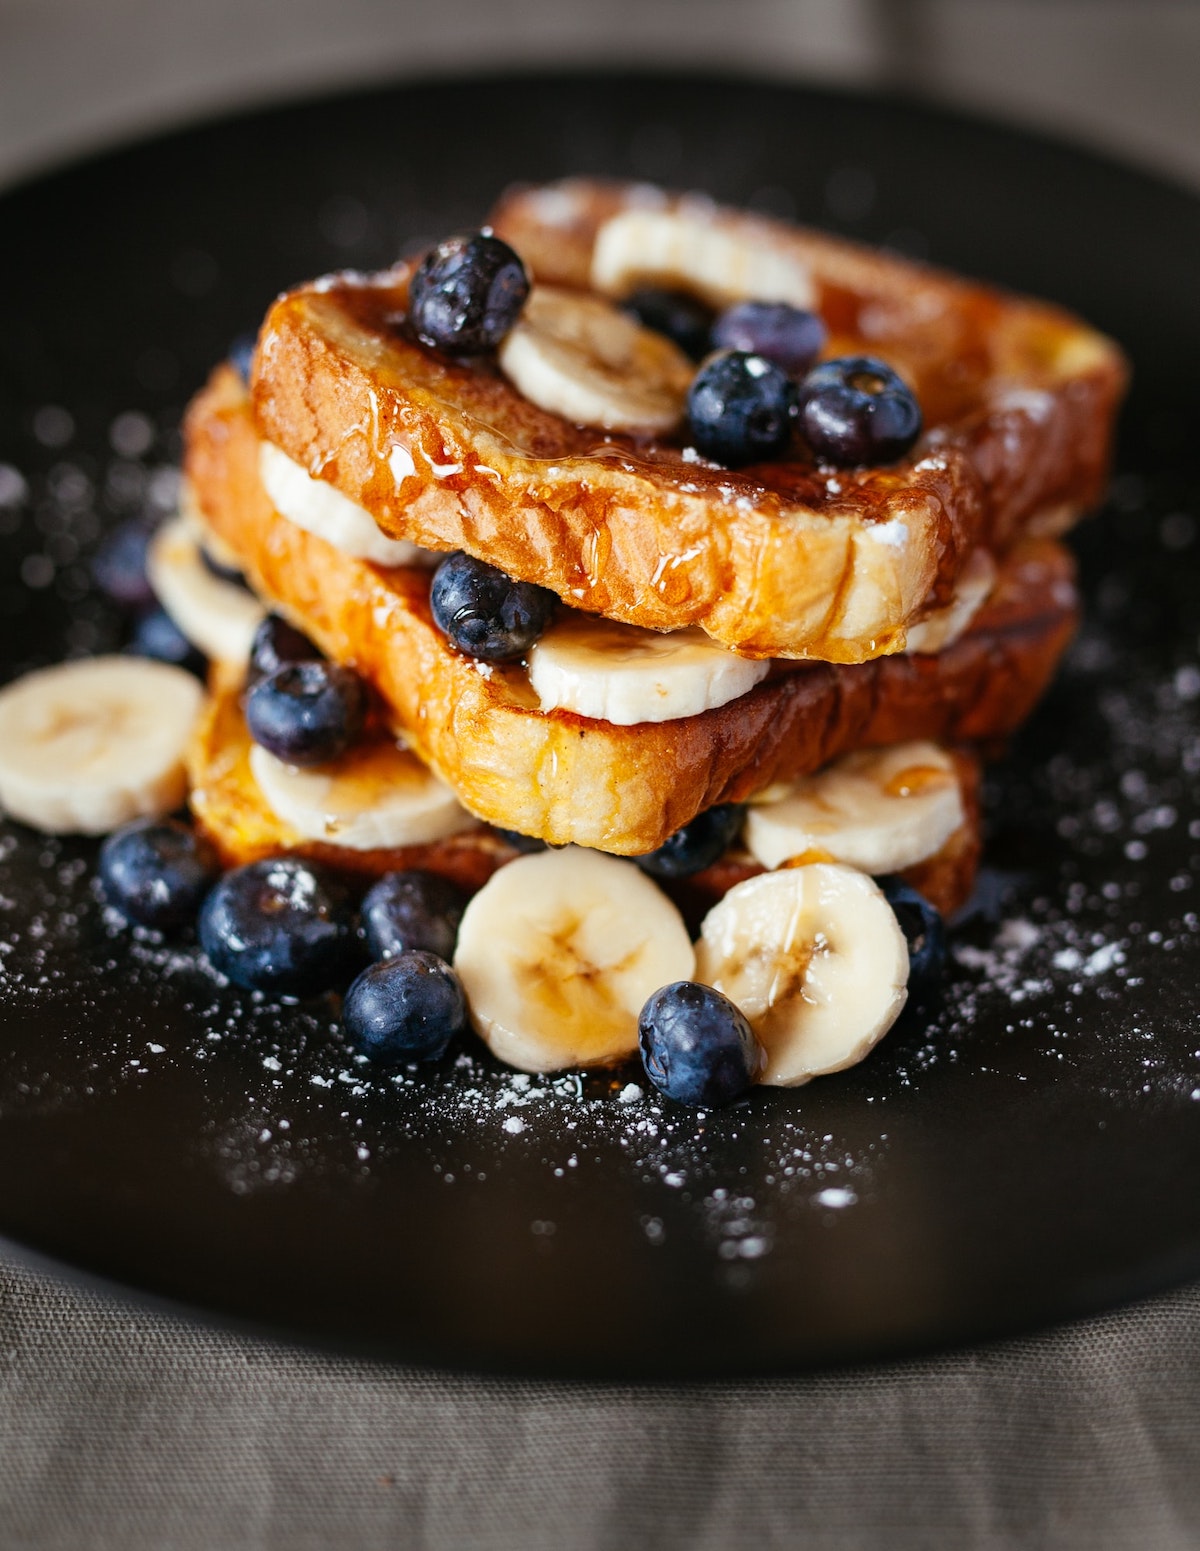 Stack of French toast slices on a black plate with blueberries and banana slices.